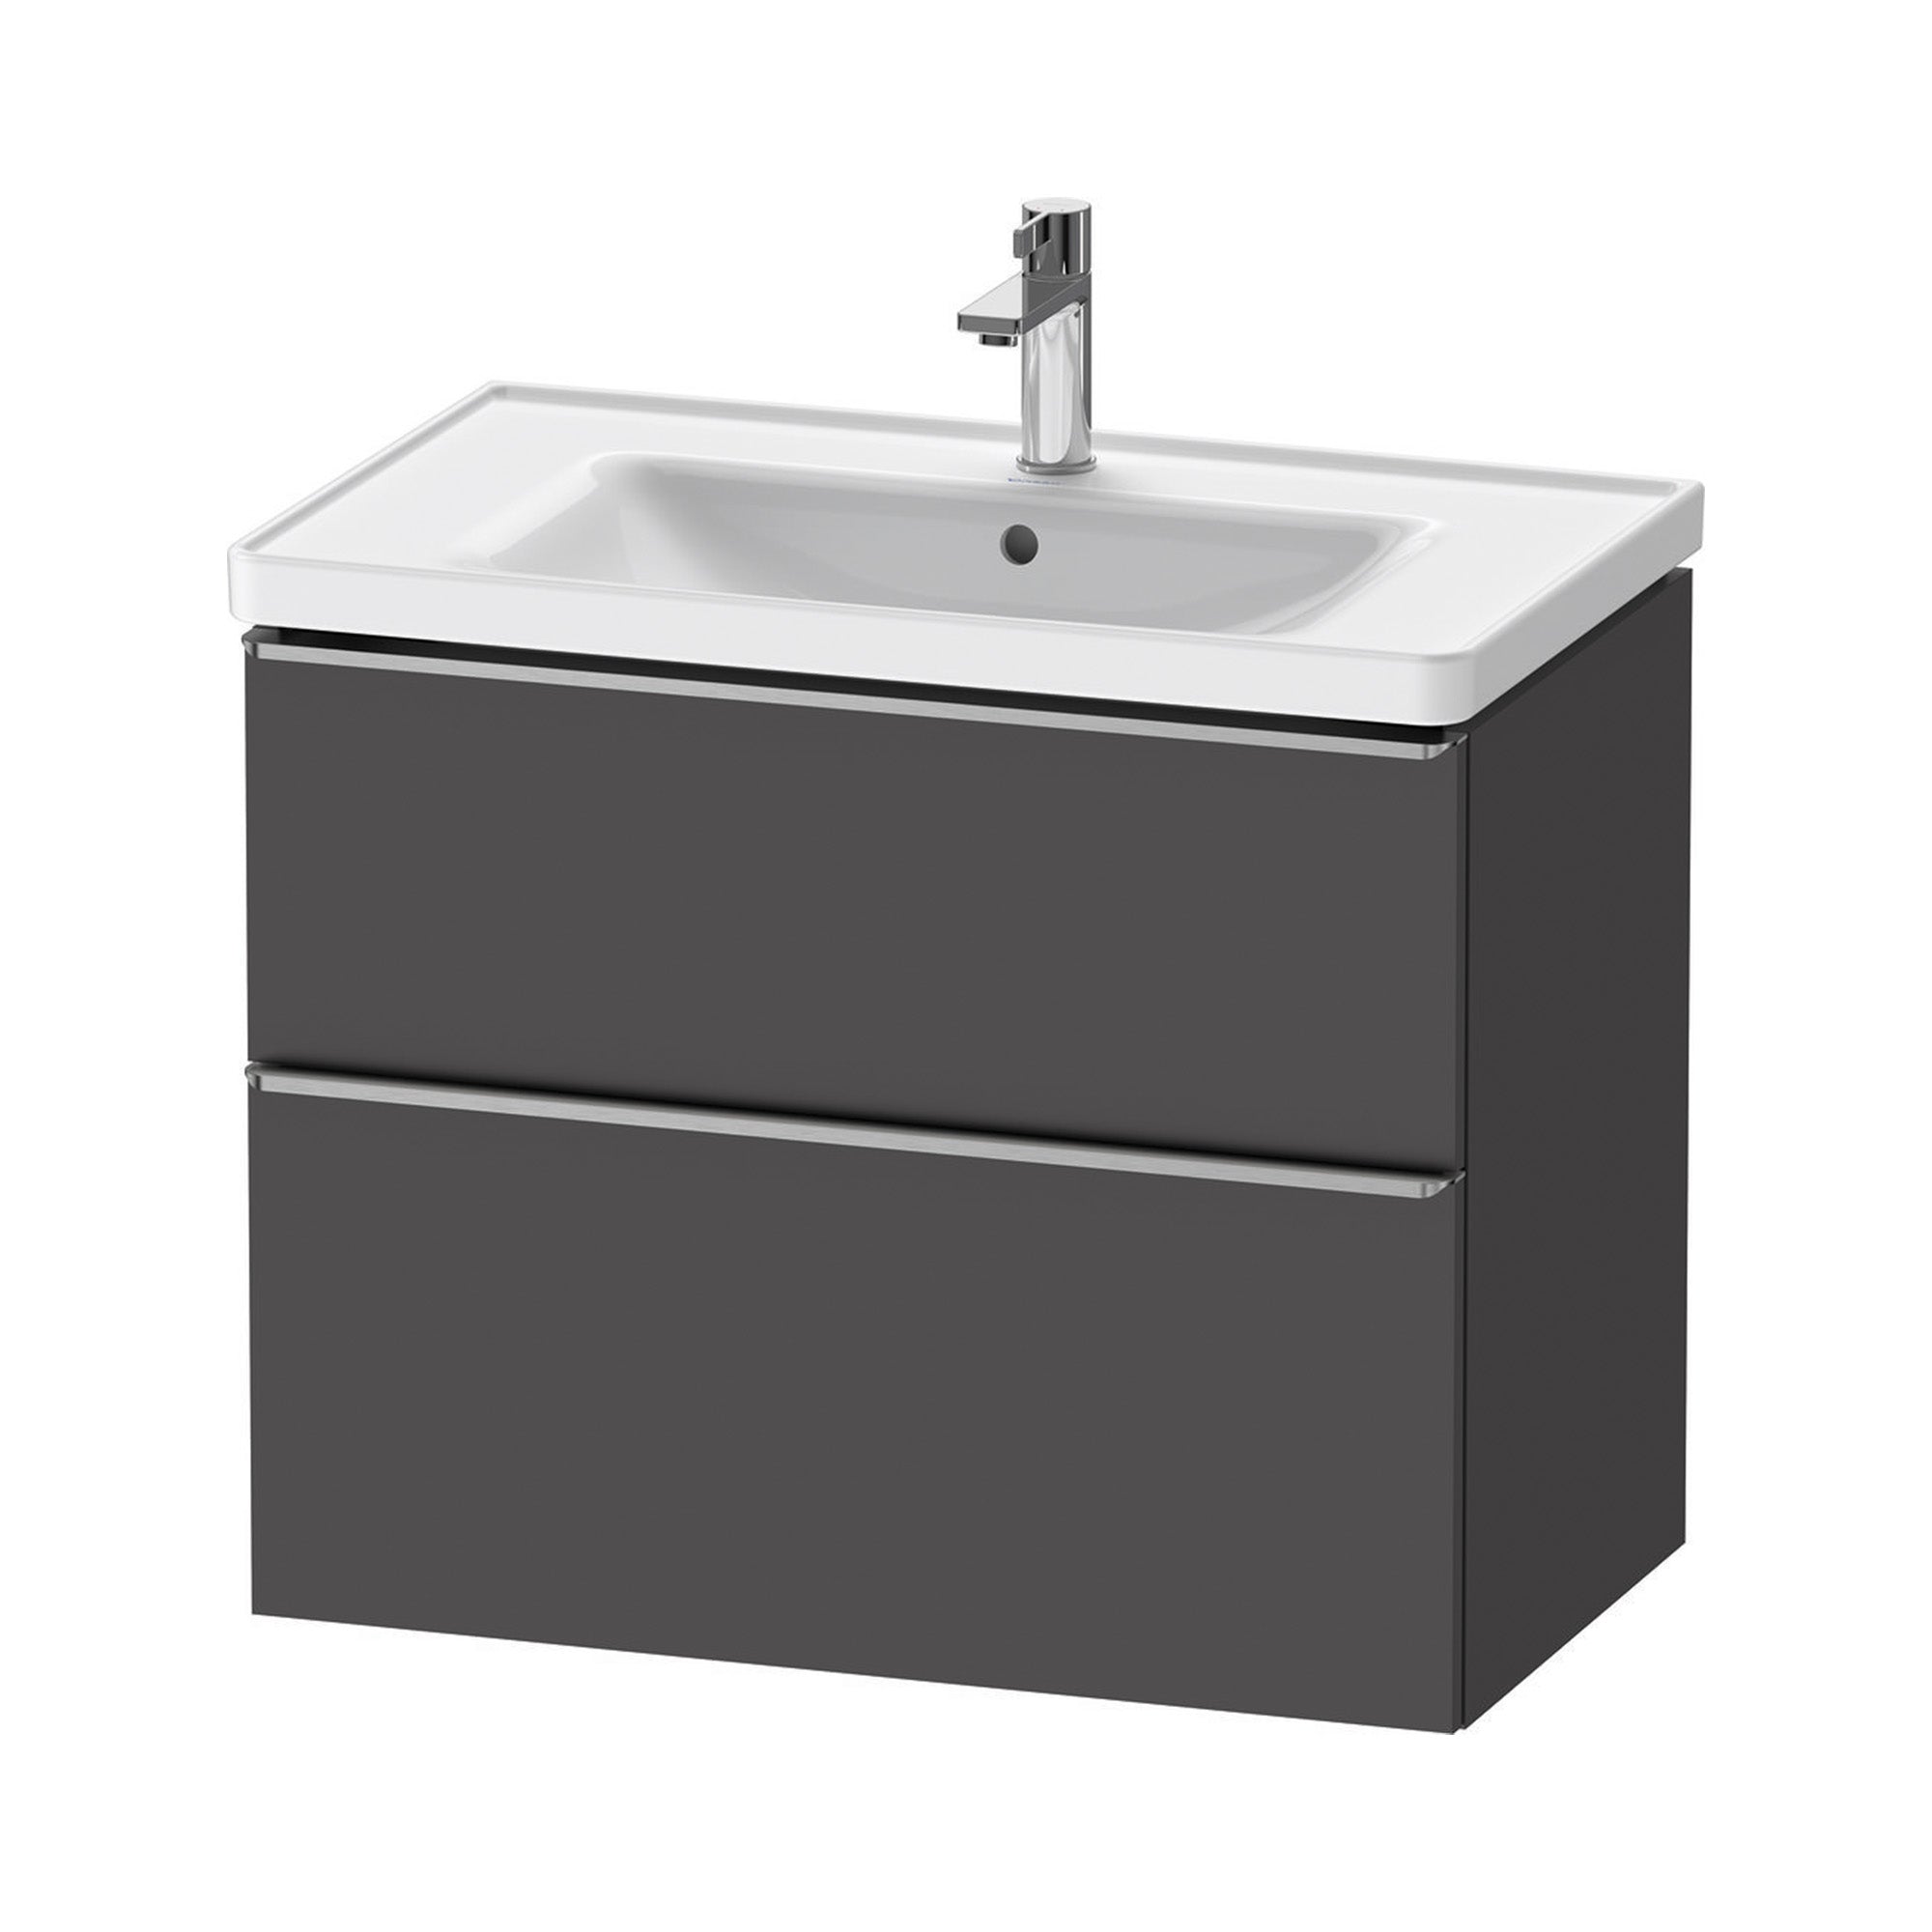 duravit d-neo 800mm wall mounted vanity unit with d-neo basin matt graphite stainless steel handles